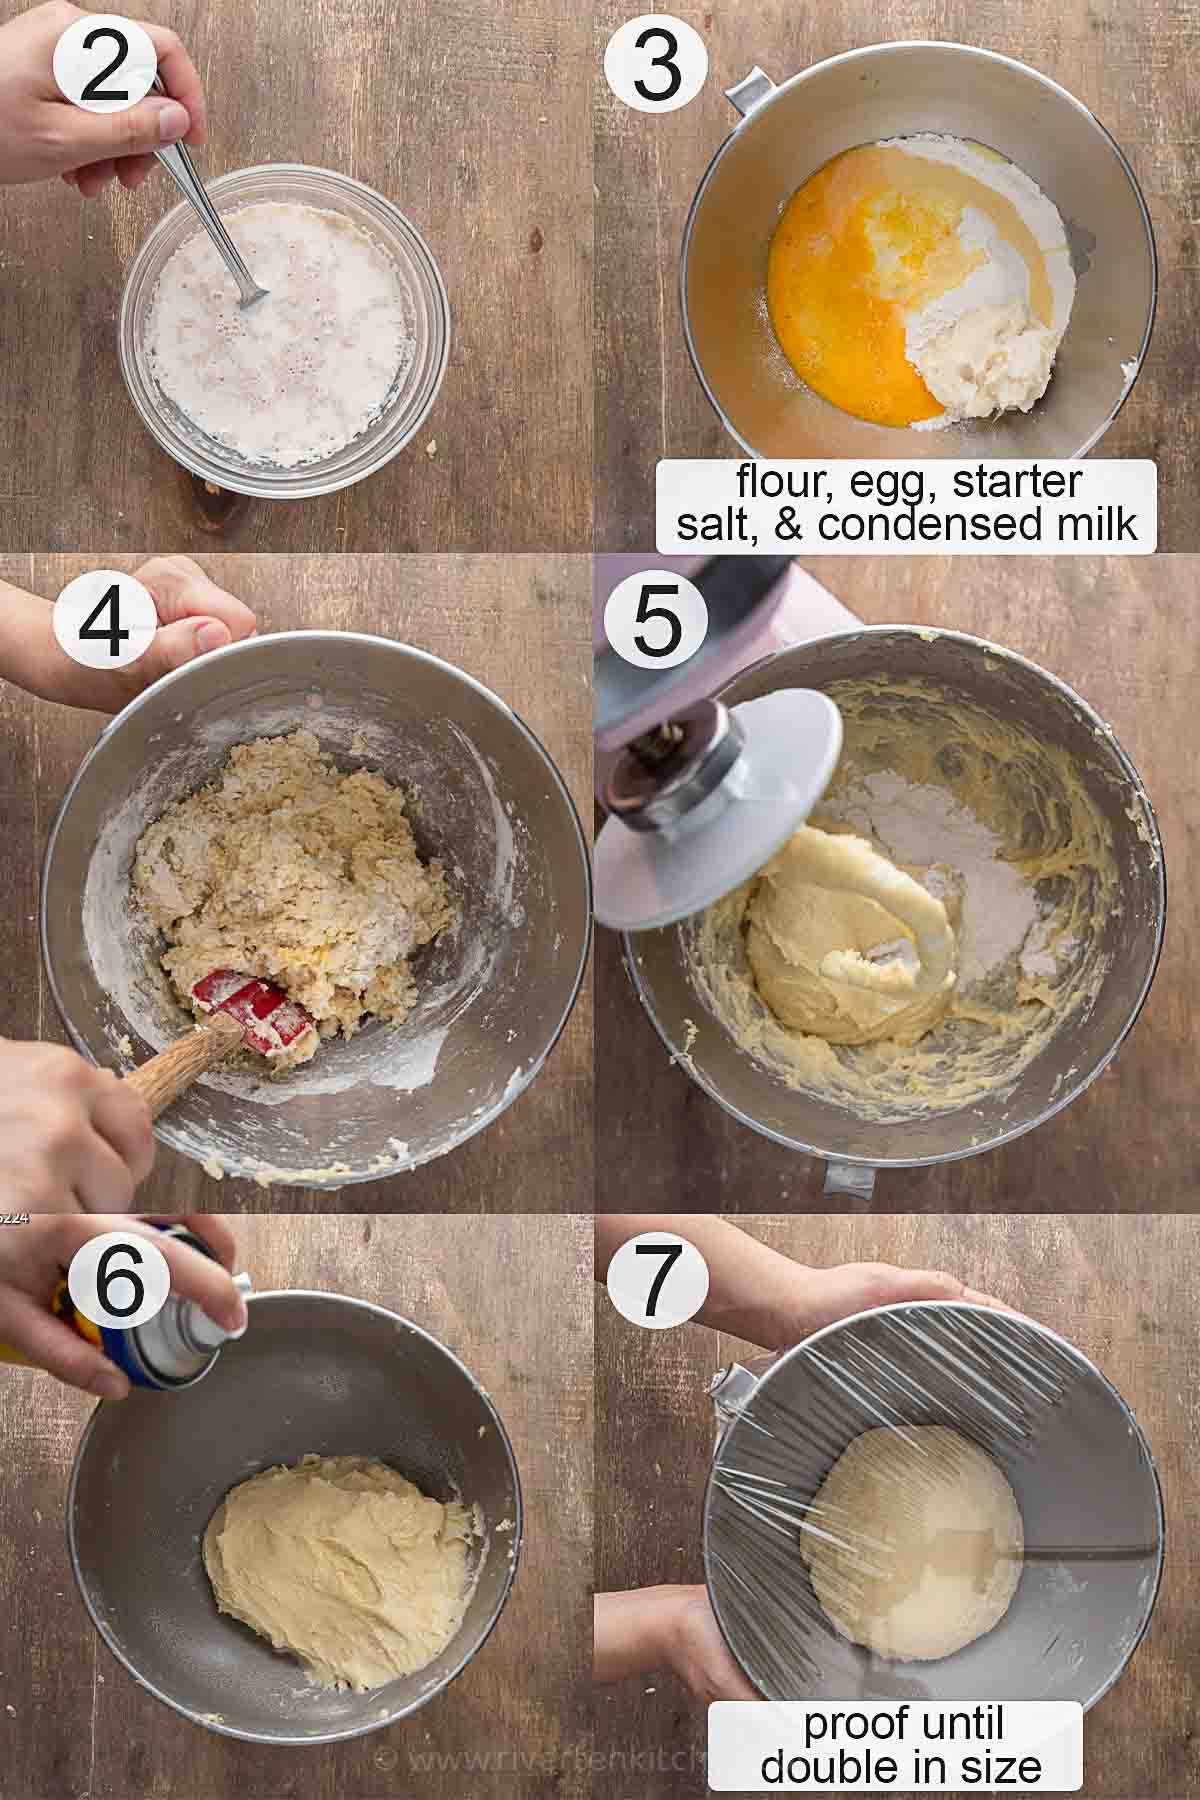 step-by-step process on how to make milk yeast bread.